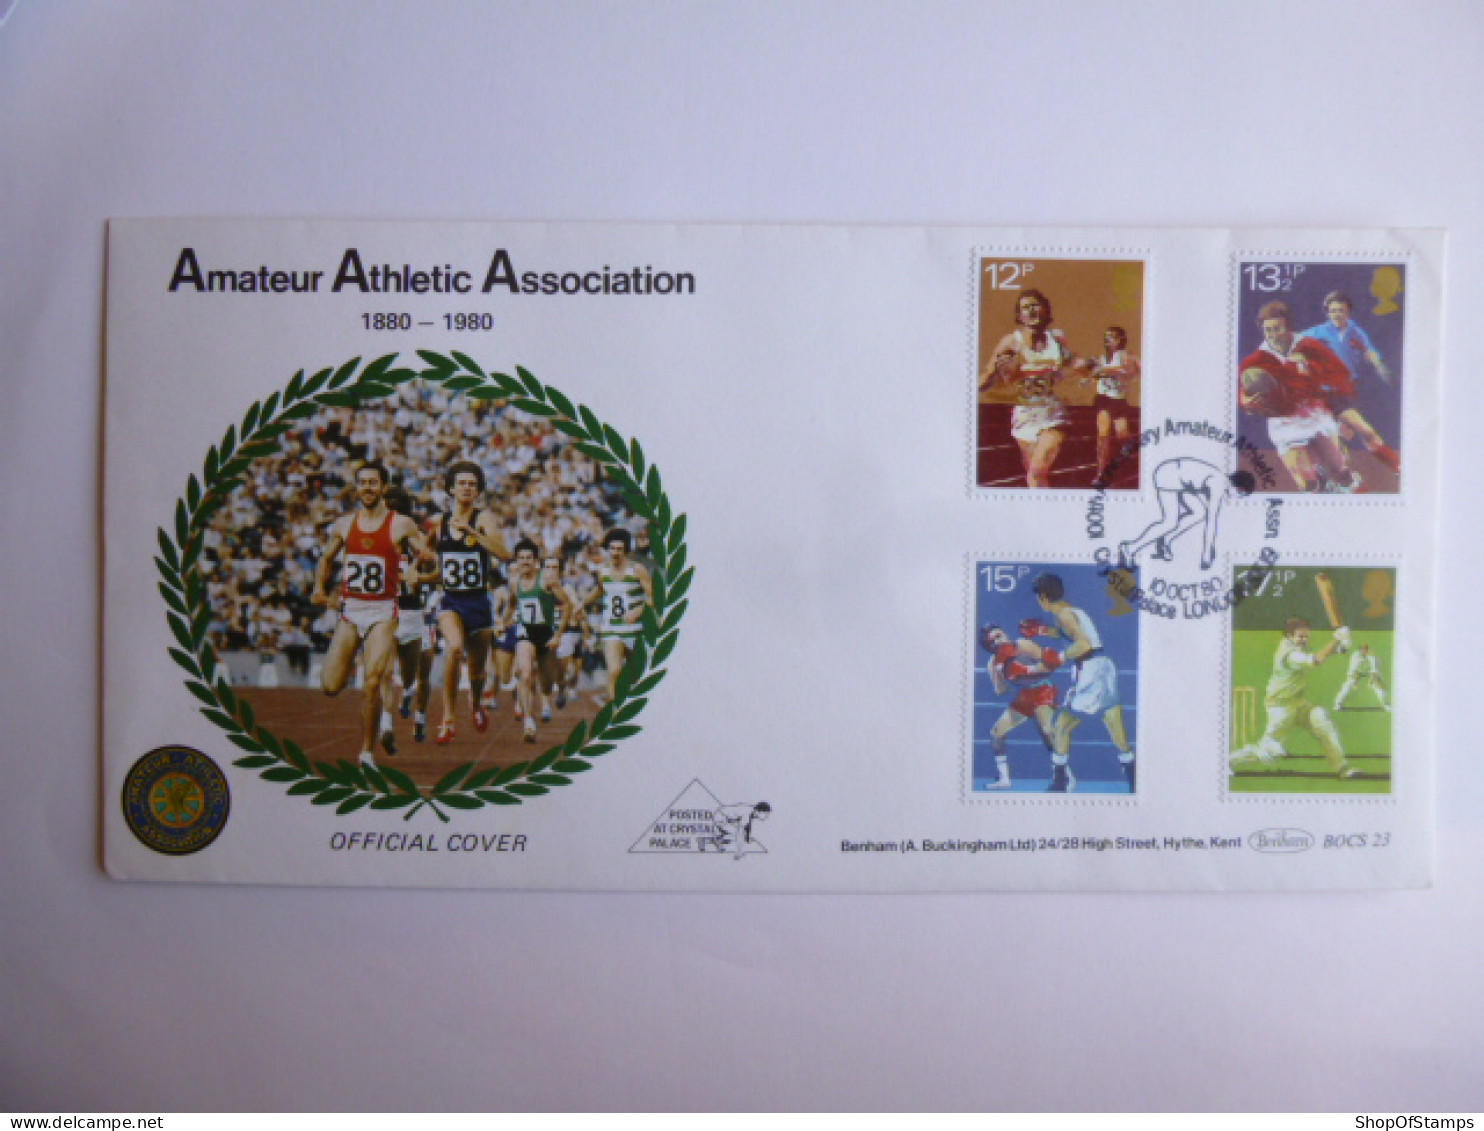 GREAT BRITAIN SG 1134-37 SPORTS CENTENARIES   FDC POSTED AT CHRYSTAL PALACE - Non Classés